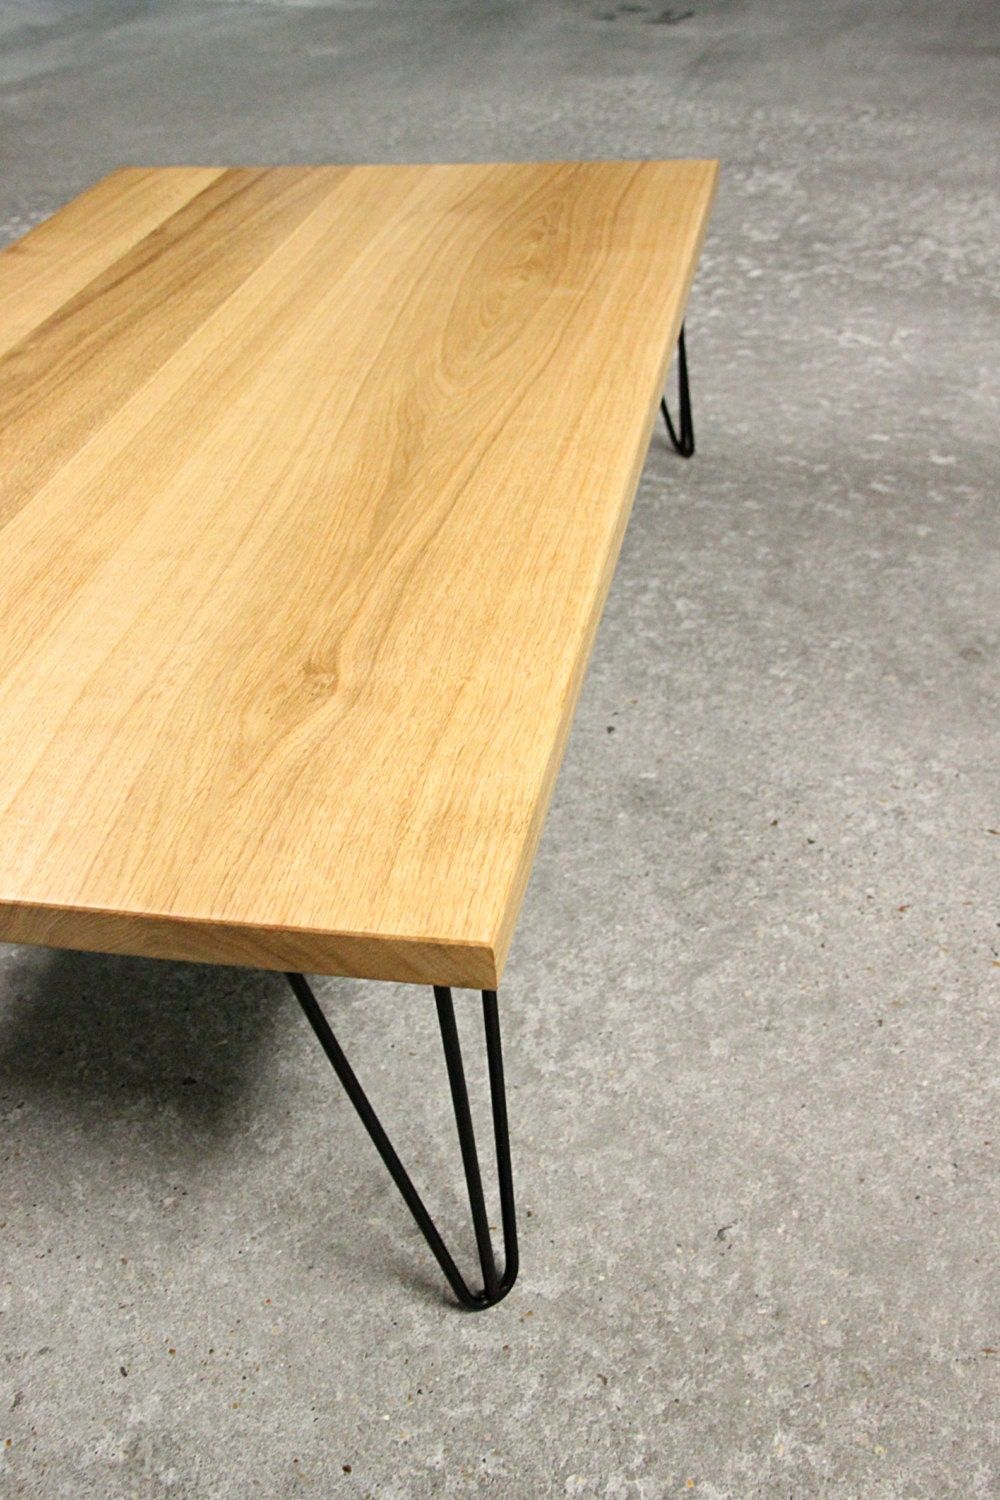 Solid Oak Coffee Table On Hairpin Legs Throughout Oak Wood And Metal Legs Coffee Tables (View 10 of 15)